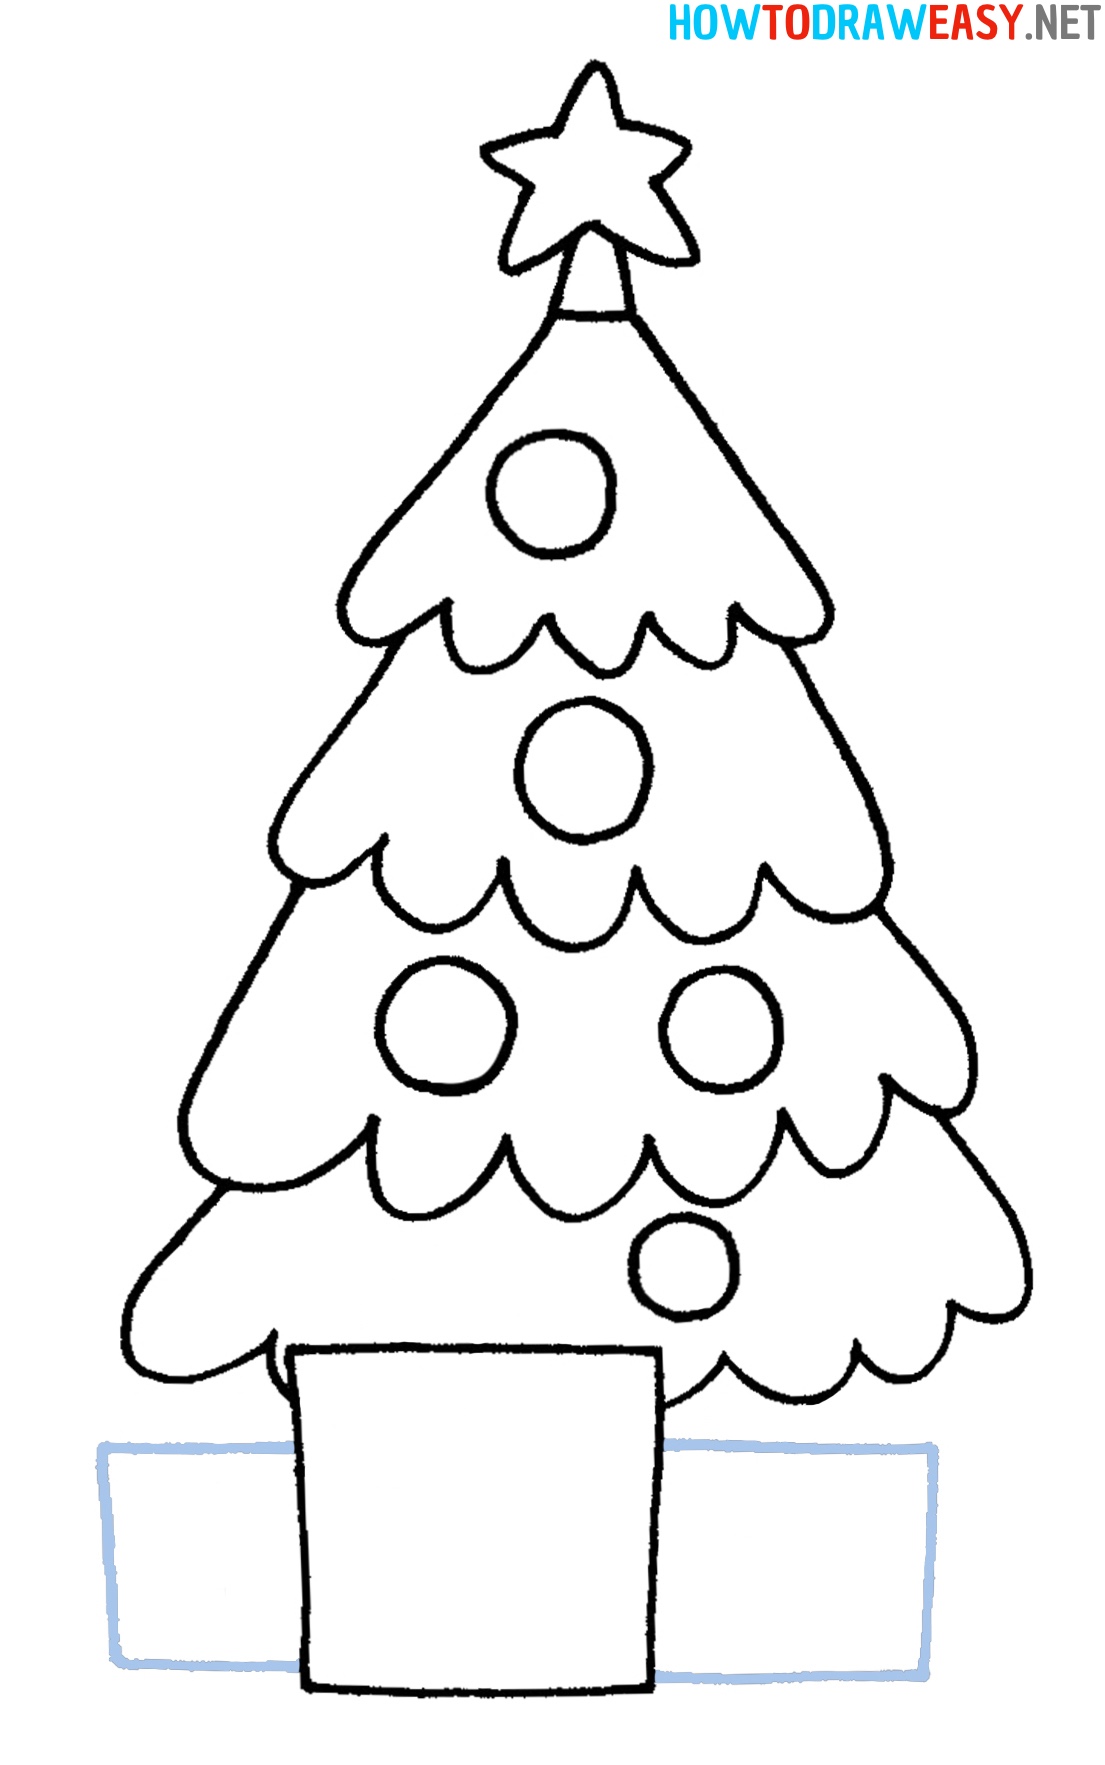 How to Sketch a Christmas Tree